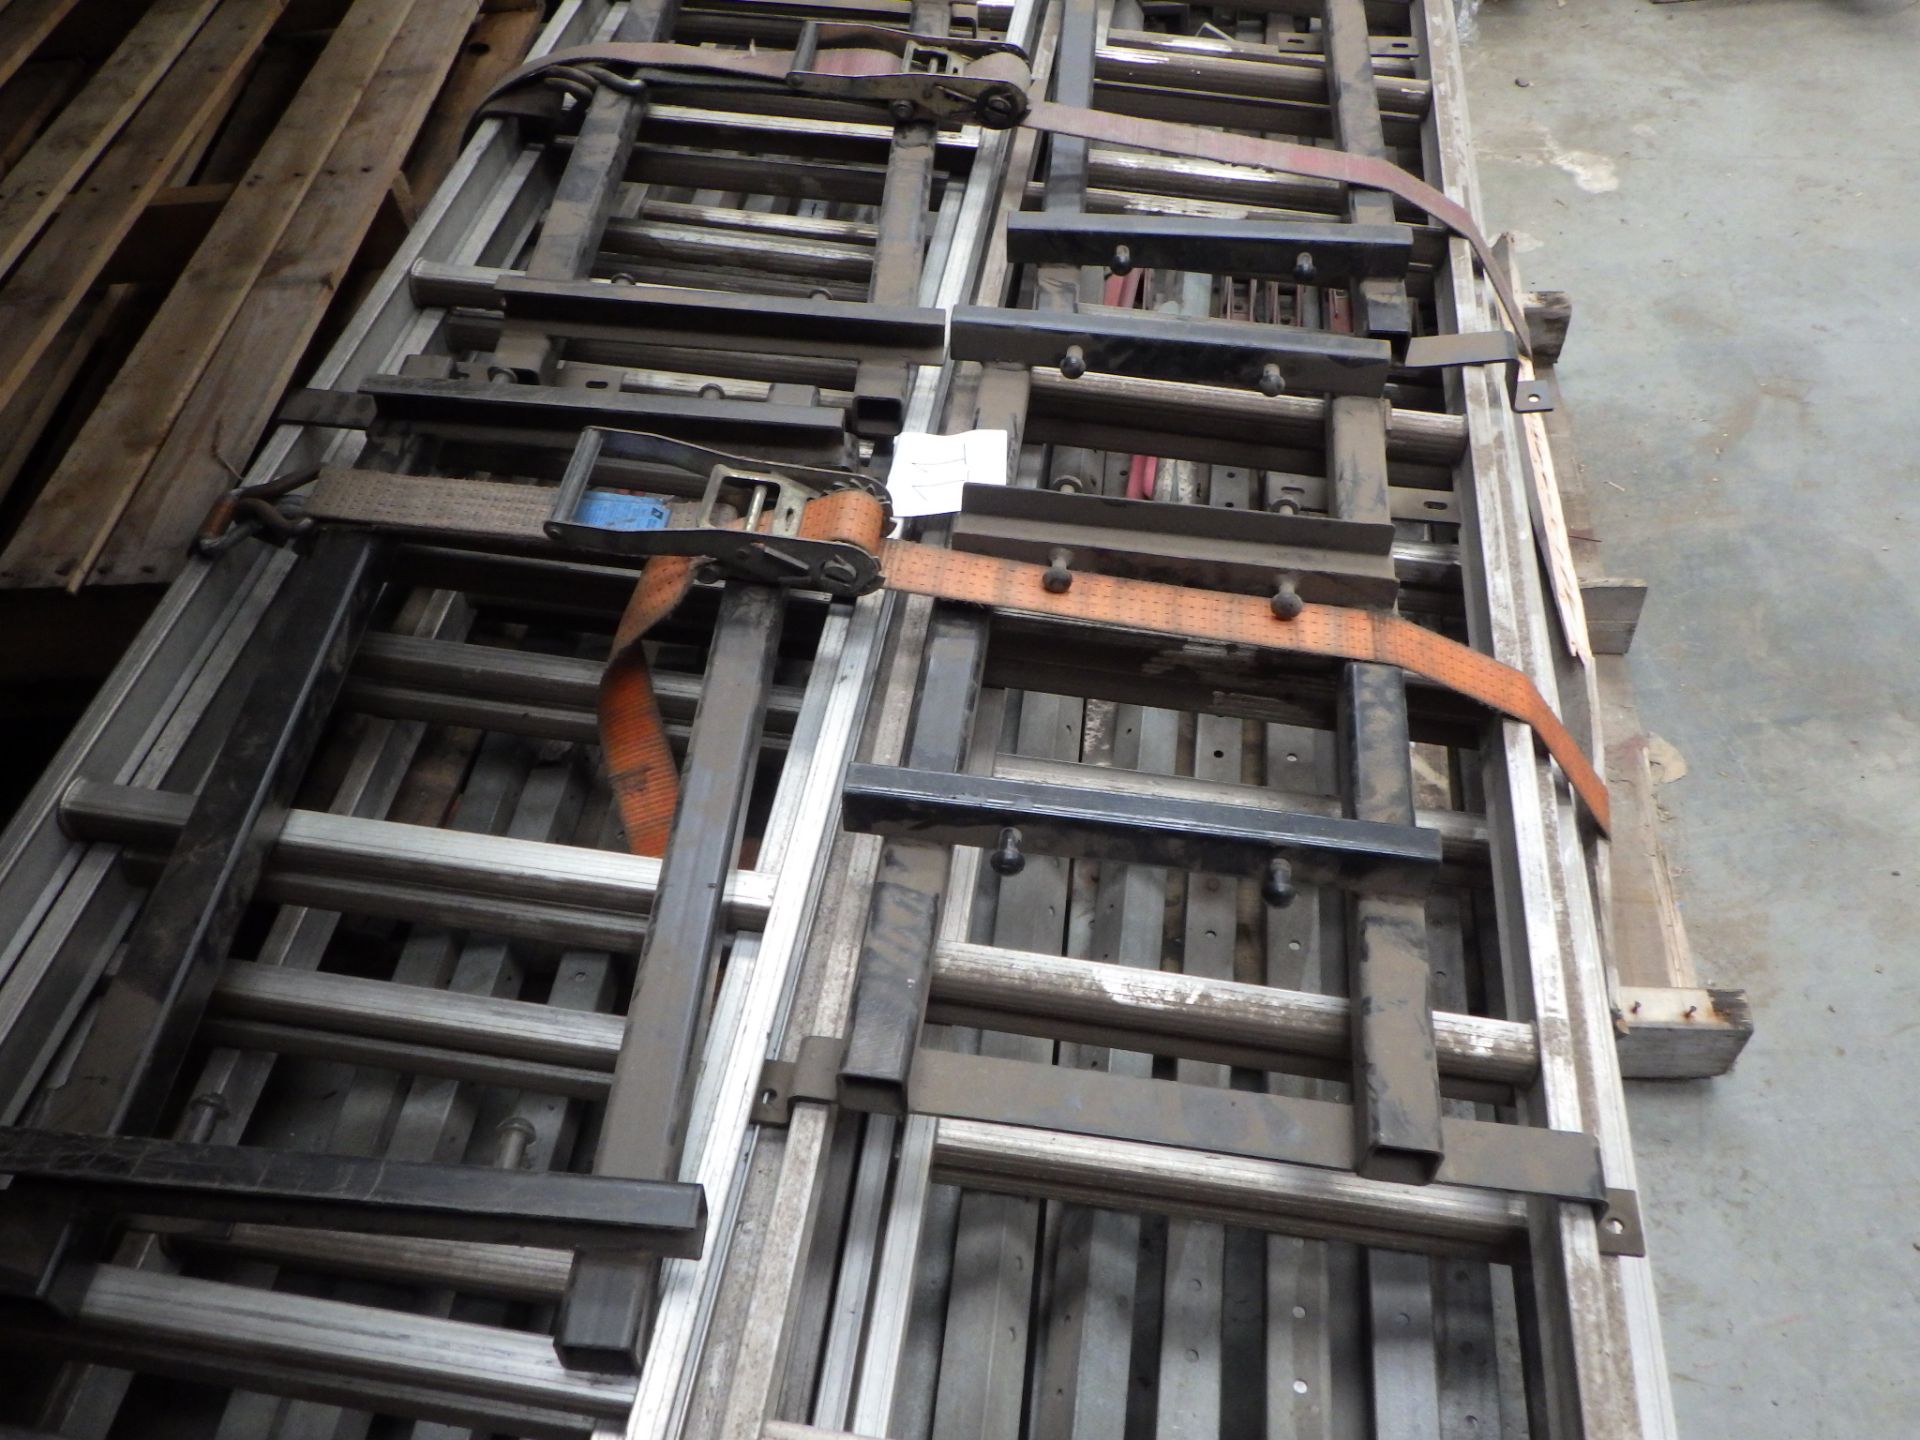 VOLVO CAB LADDERS AND LOAD RESTRAINT BARS - Image 3 of 3